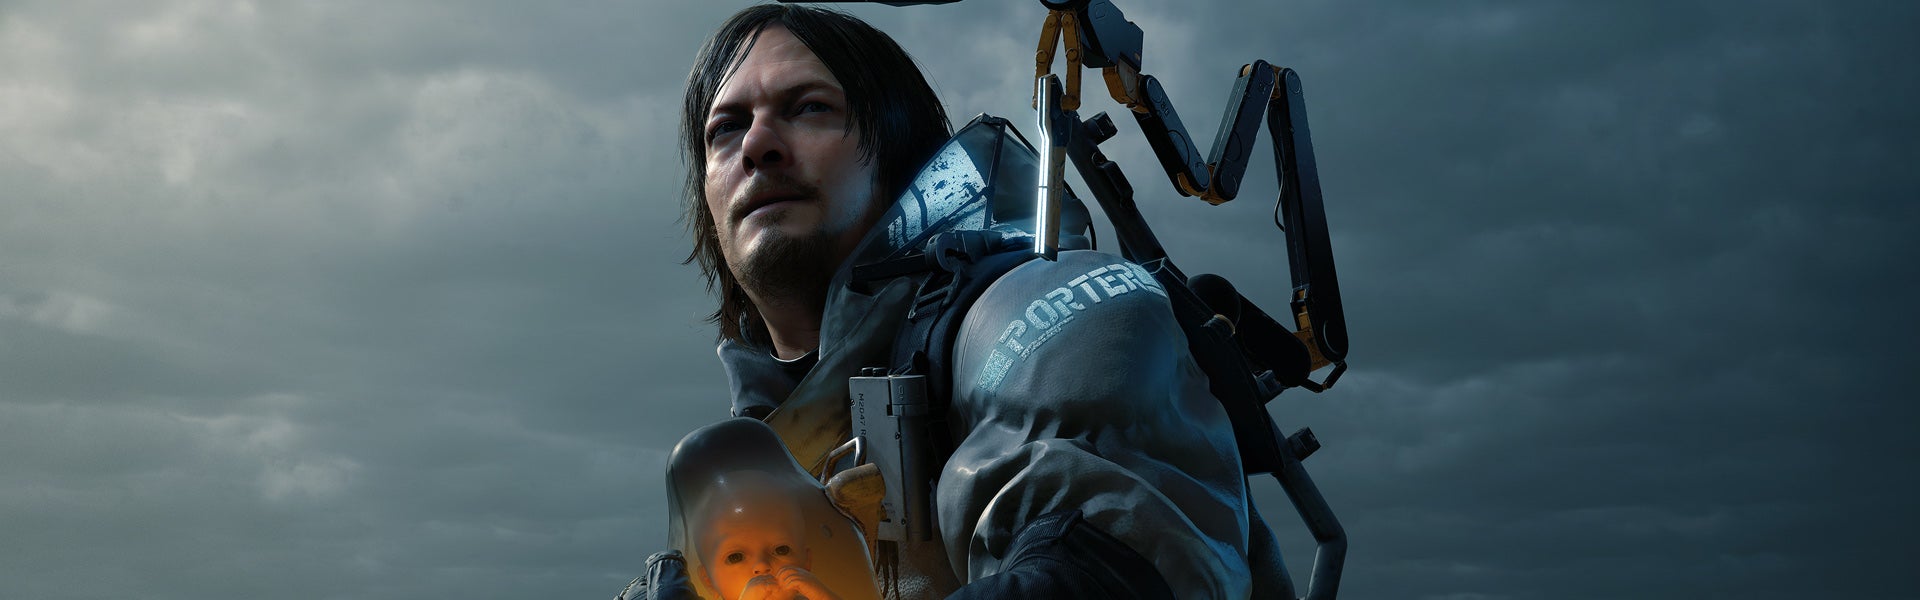 Image for Death Stranding, Control, Outer Wilds lead nominations for 20th annual GDC Awards